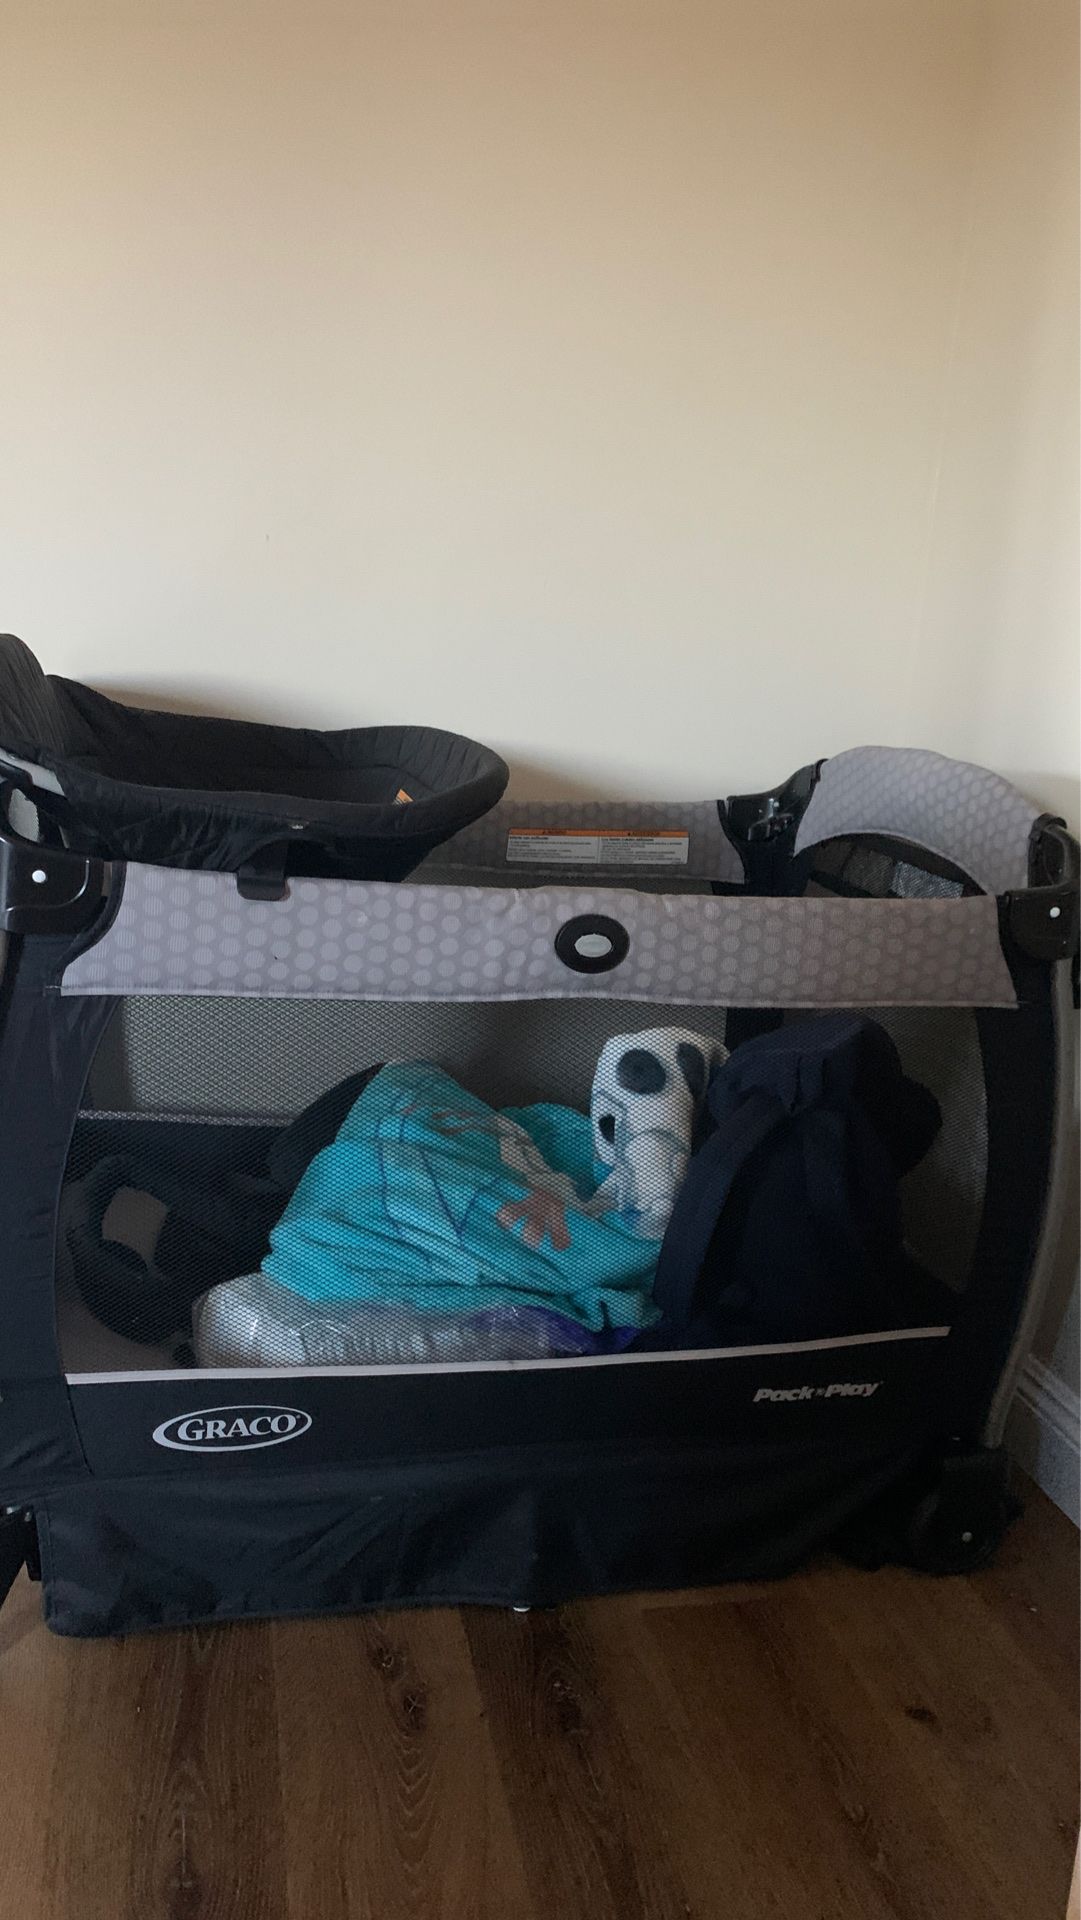 Graco pack and play w/bassinet. Check out all my offers